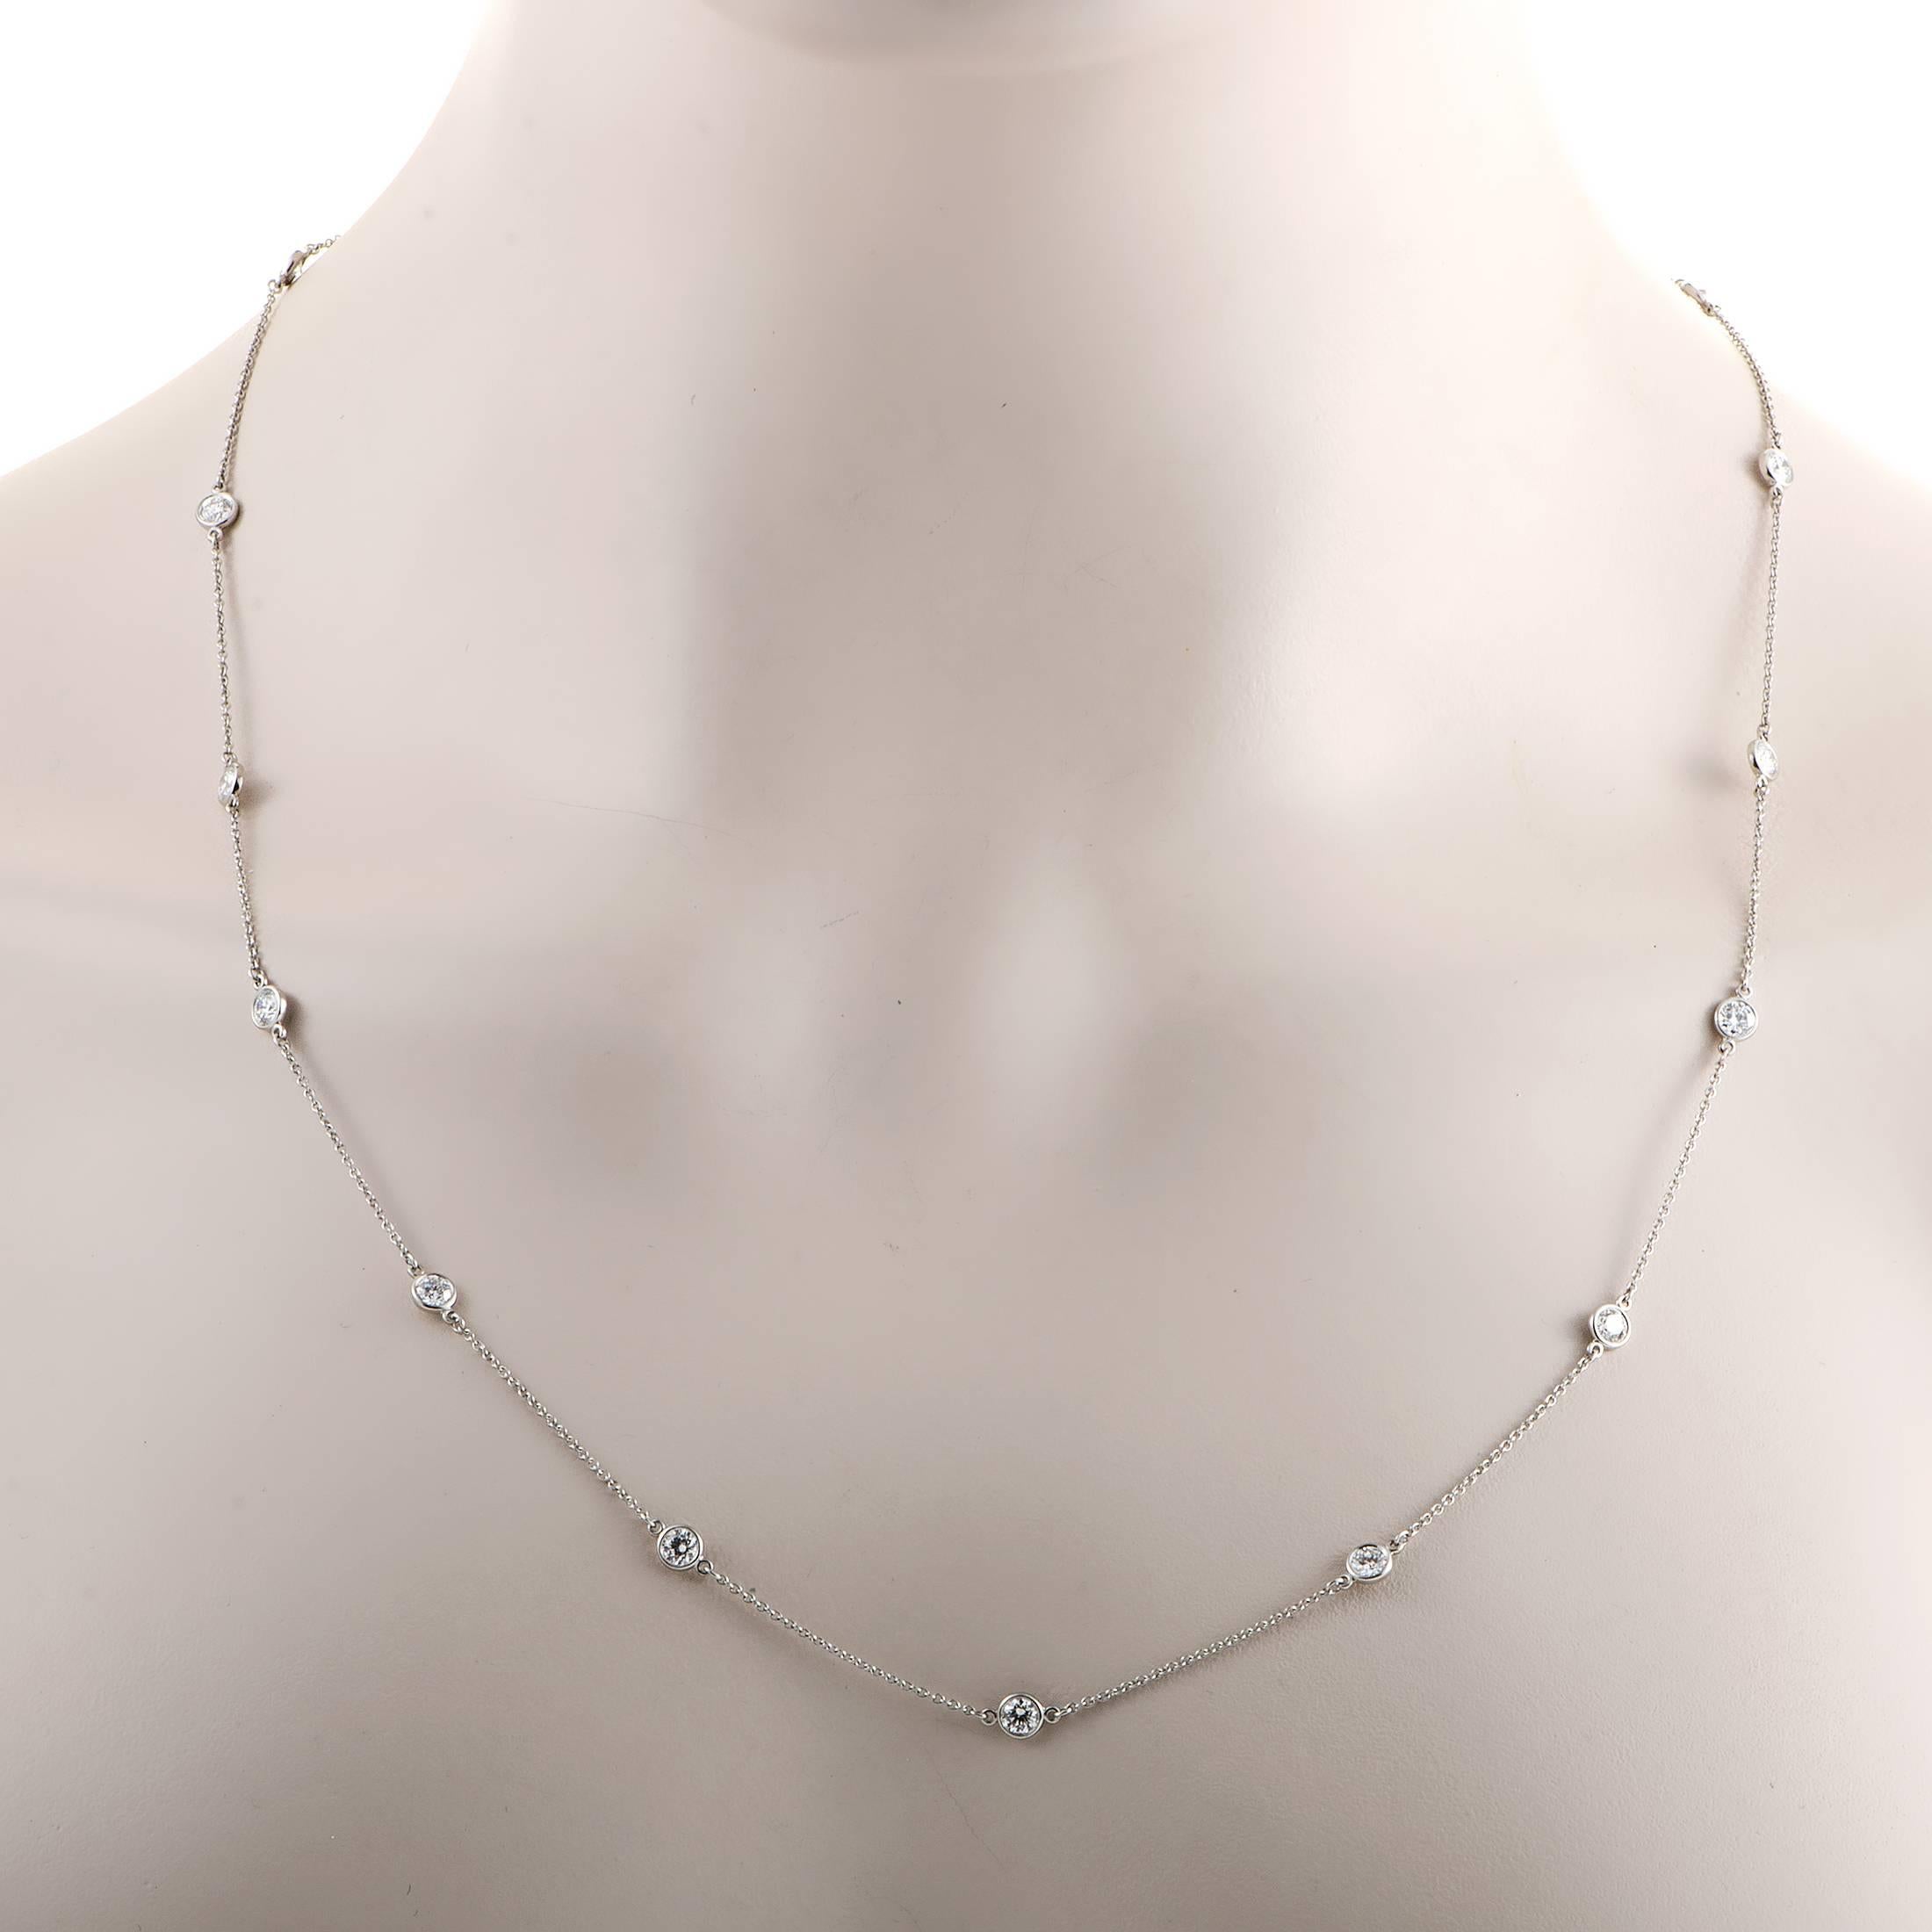 Prestigious resplendence, aesthetic refinement and tender femininity are clearly stated in this sublime necklace designed by Elsa Peretti for Tiffany & Co. which combines charming diamonds totaling 2.80 carats with fascinatingly supple and elongated